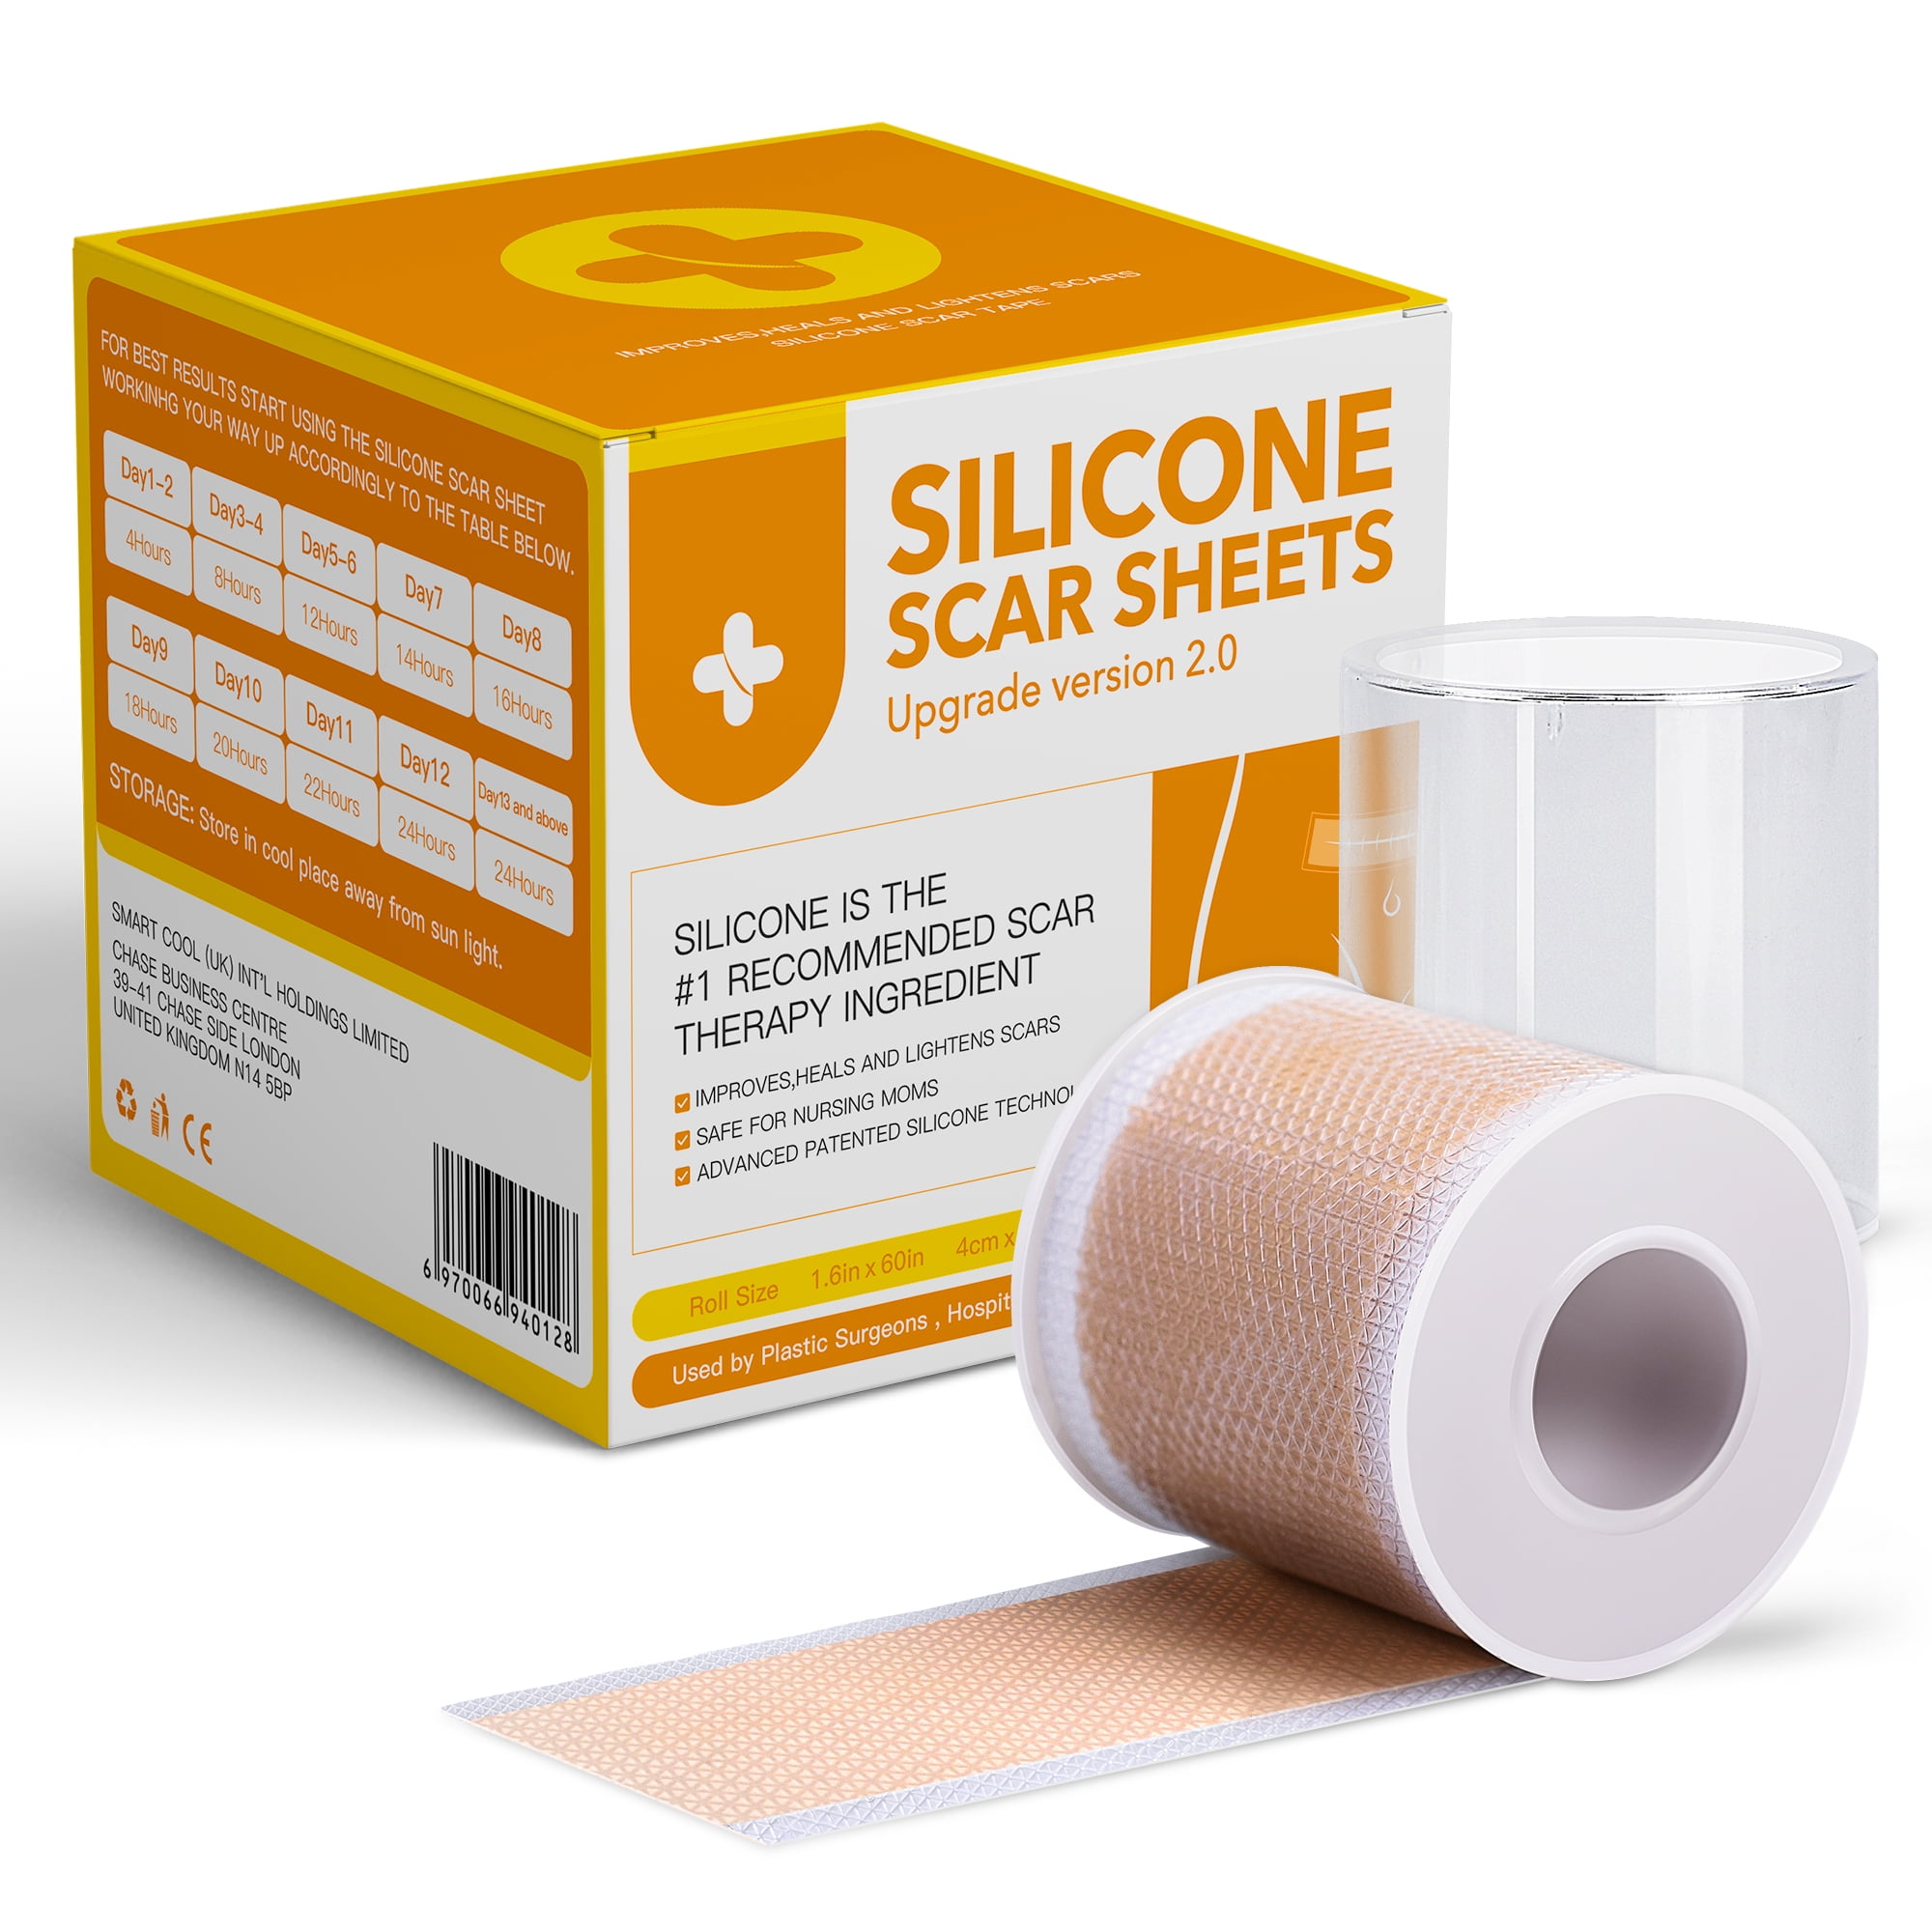 Silicone Scar Sheets (1.6 X 60), Medical Silicone Scar Tape Roll